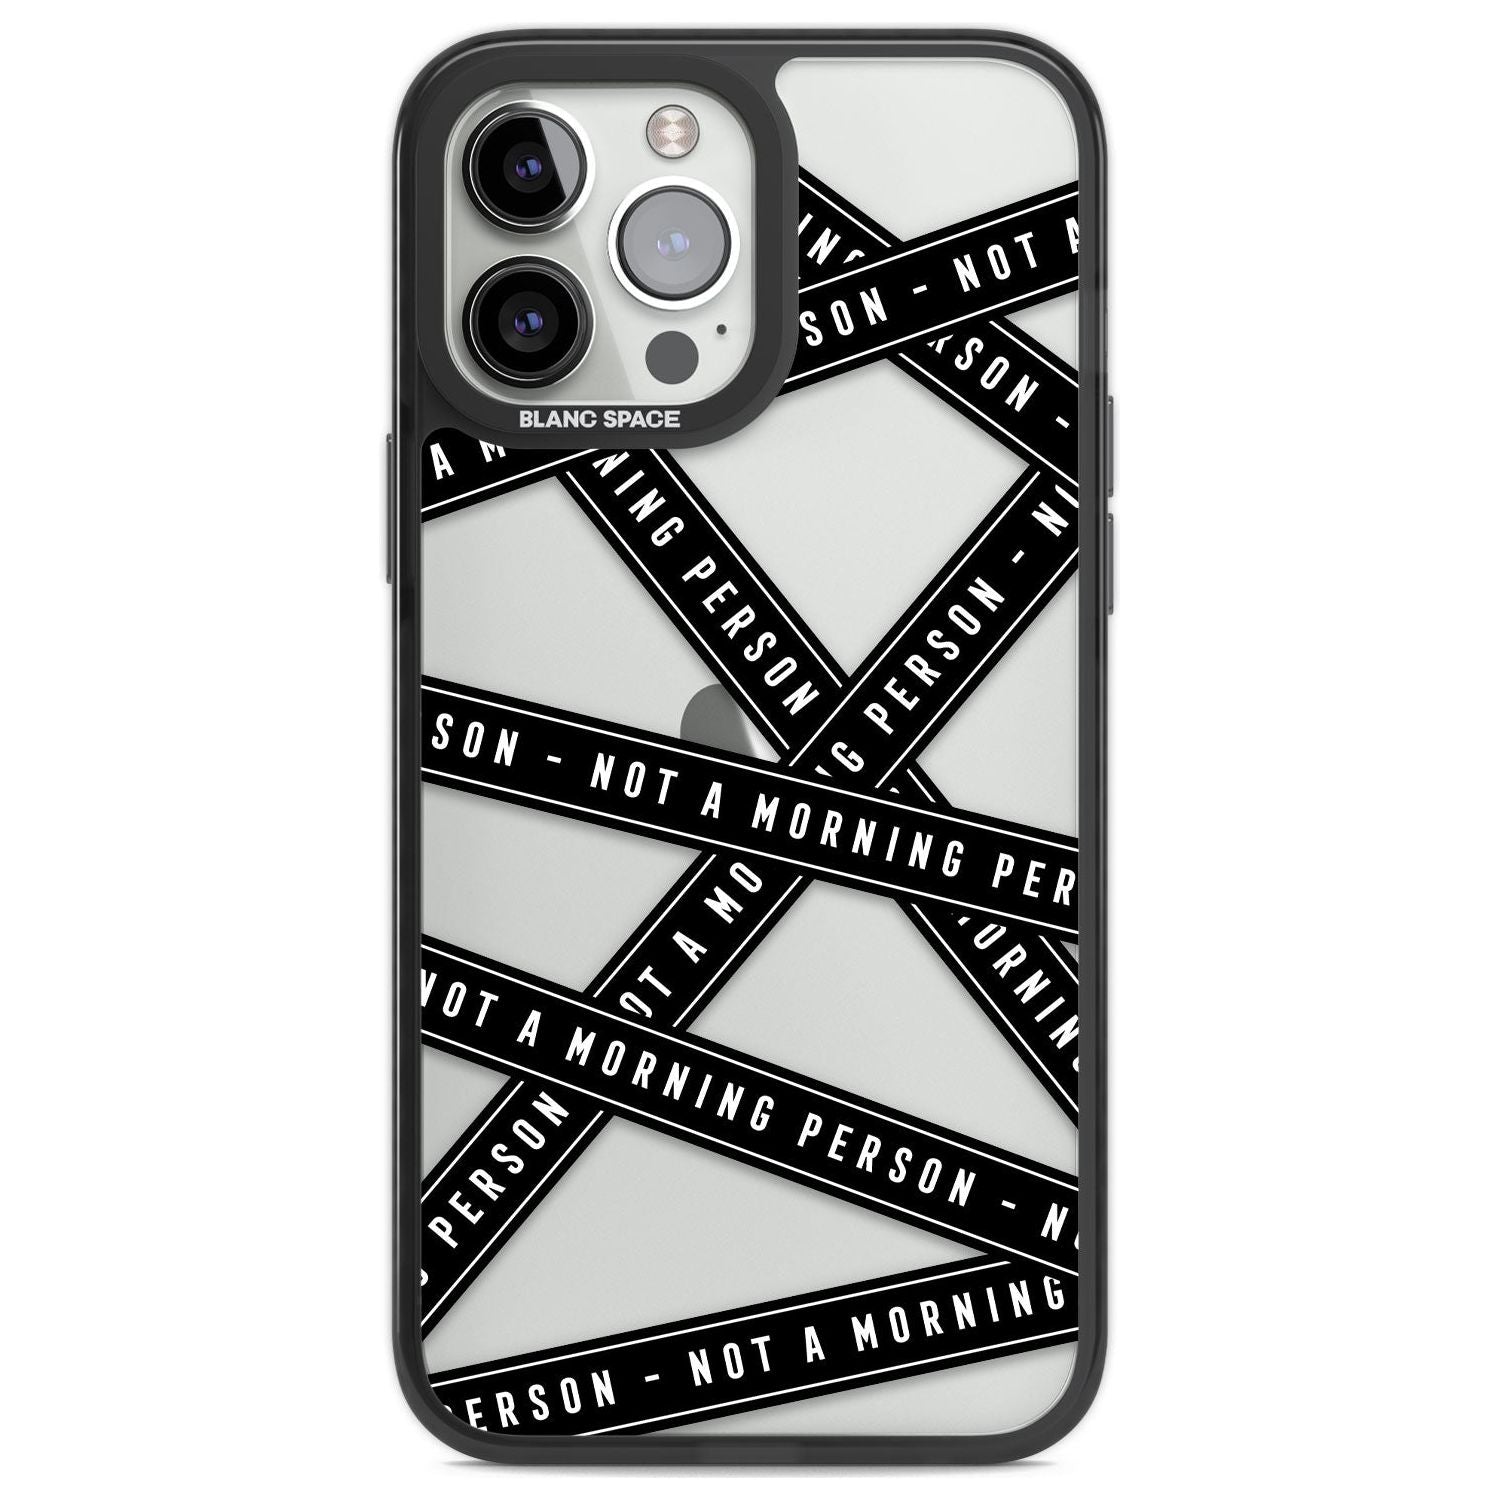 Caution Tape (Clear) Not a Morning Person Phone Case iPhone 13 Pro Max / Black Impact Case,iPhone 14 Pro Max / Black Impact Case Blanc Space